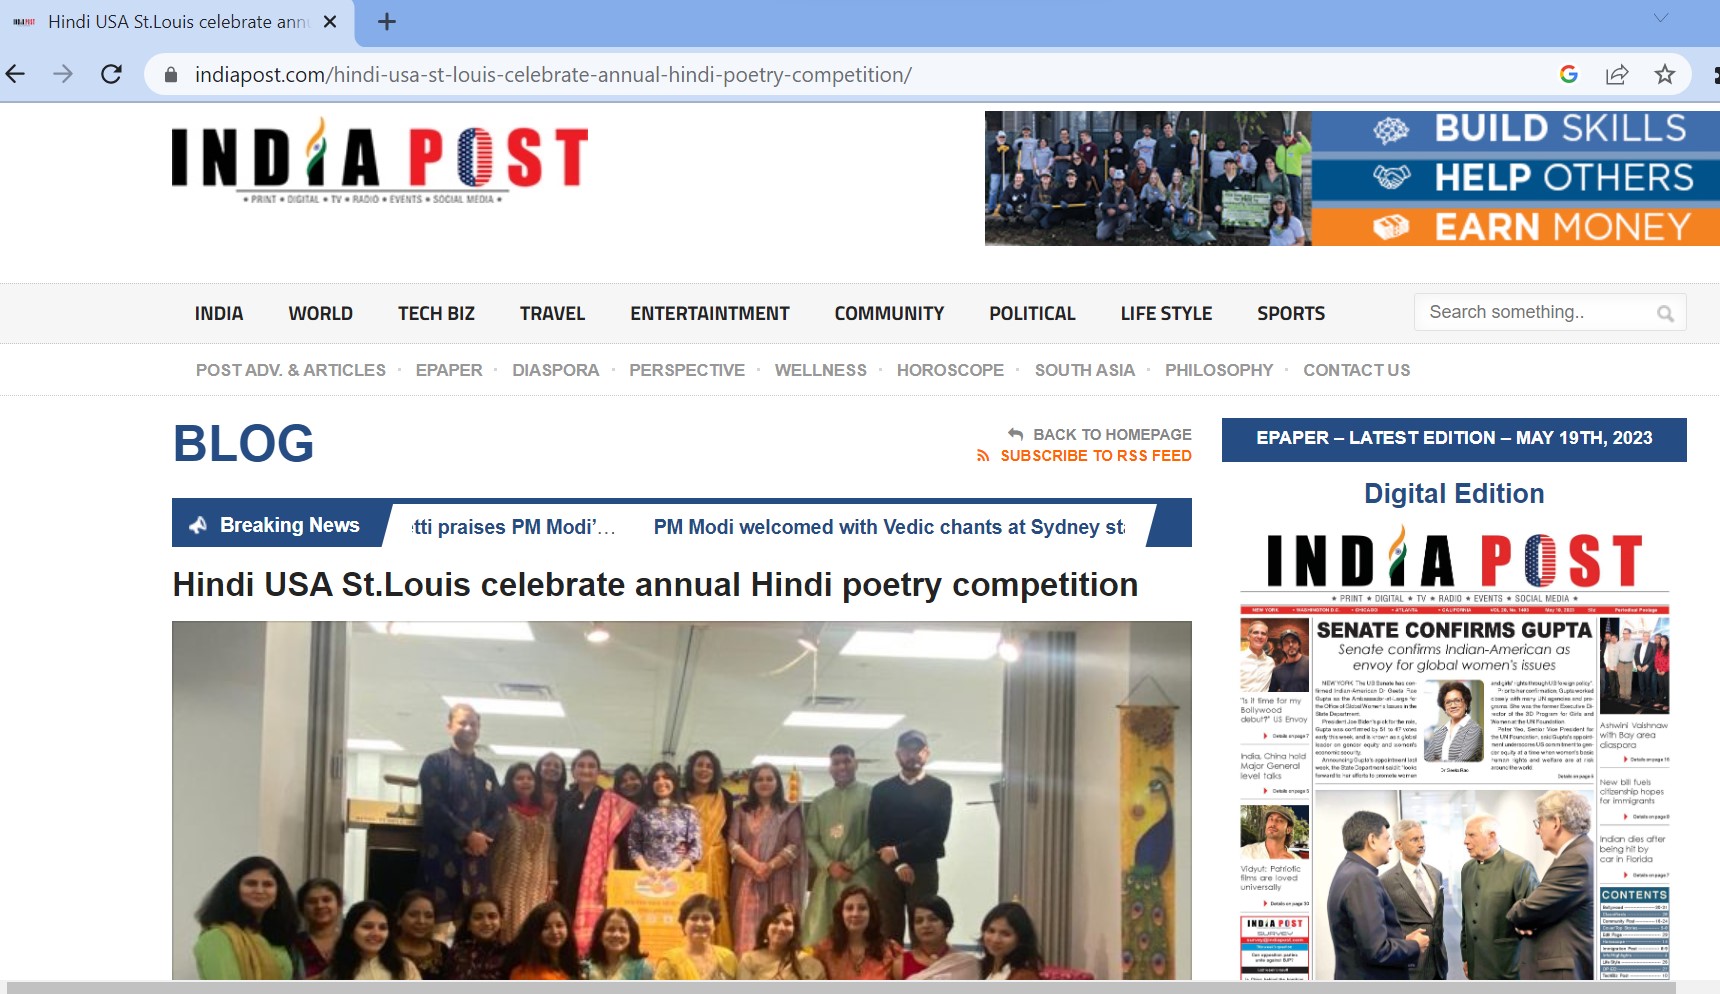 PRESS RELEASE: India Post - Hindi poetry competition (Jan 2023)